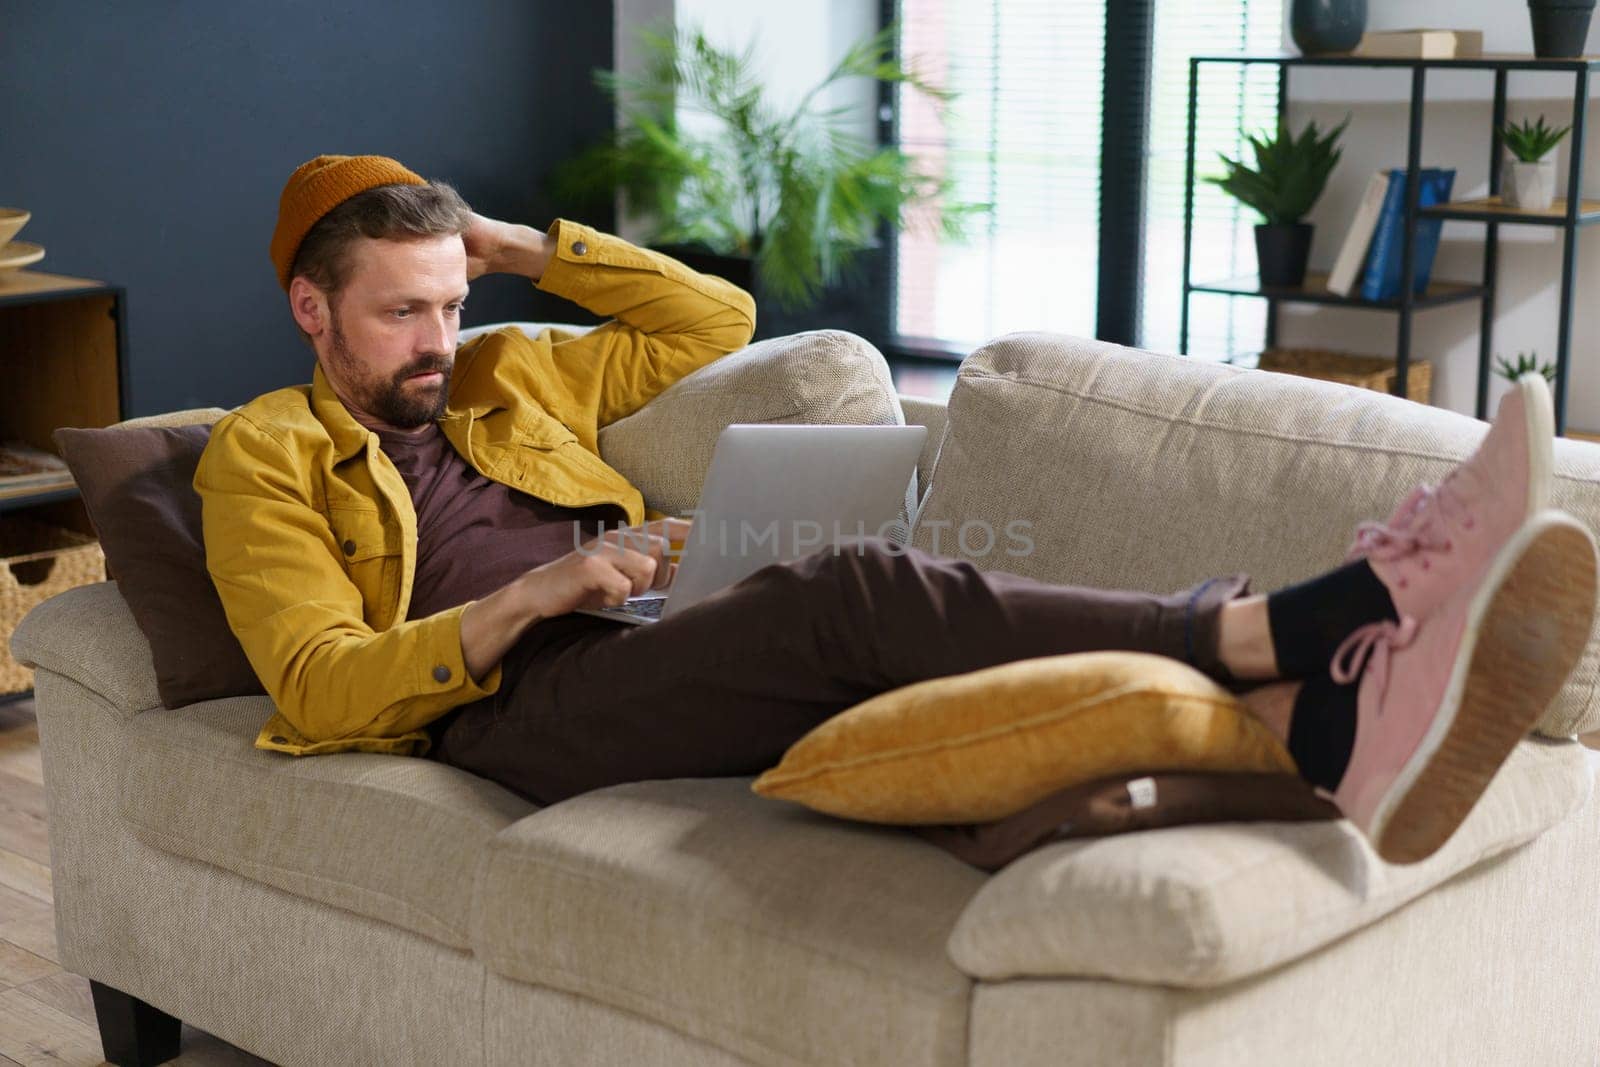 Wise programmer deep in thought, contemplating how to write code for program. Freelancer comfortably laying on sofa while working from home, embracing flexibility and benefits of remote work. . High quality photo